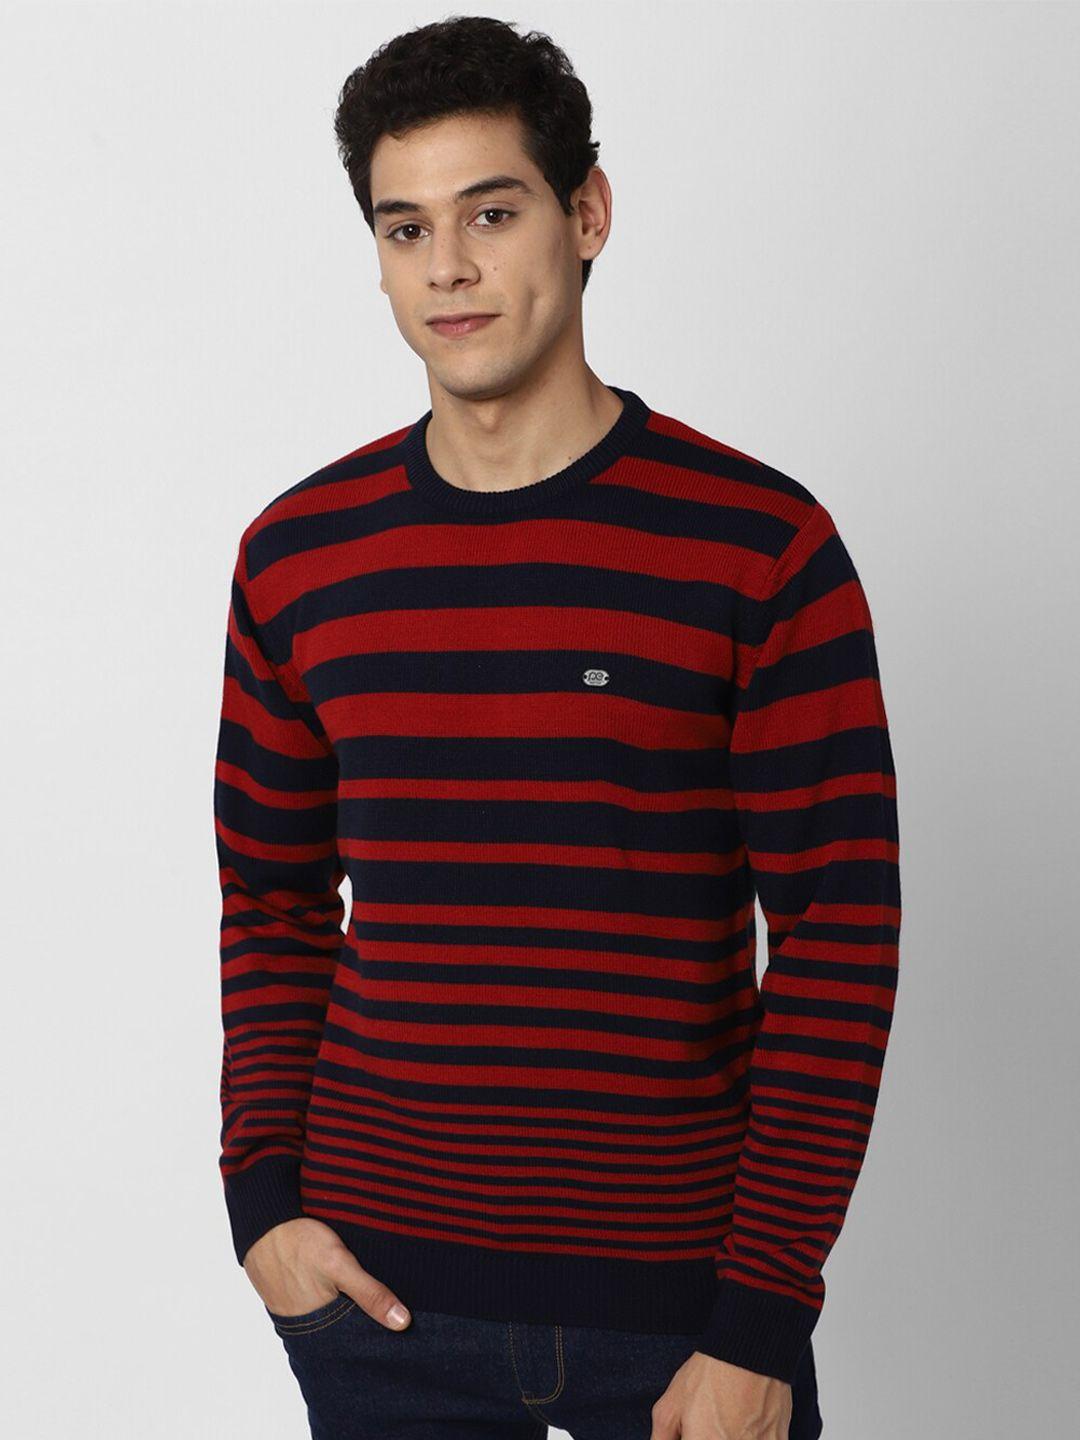 peter england casuals men red & black striped sweater